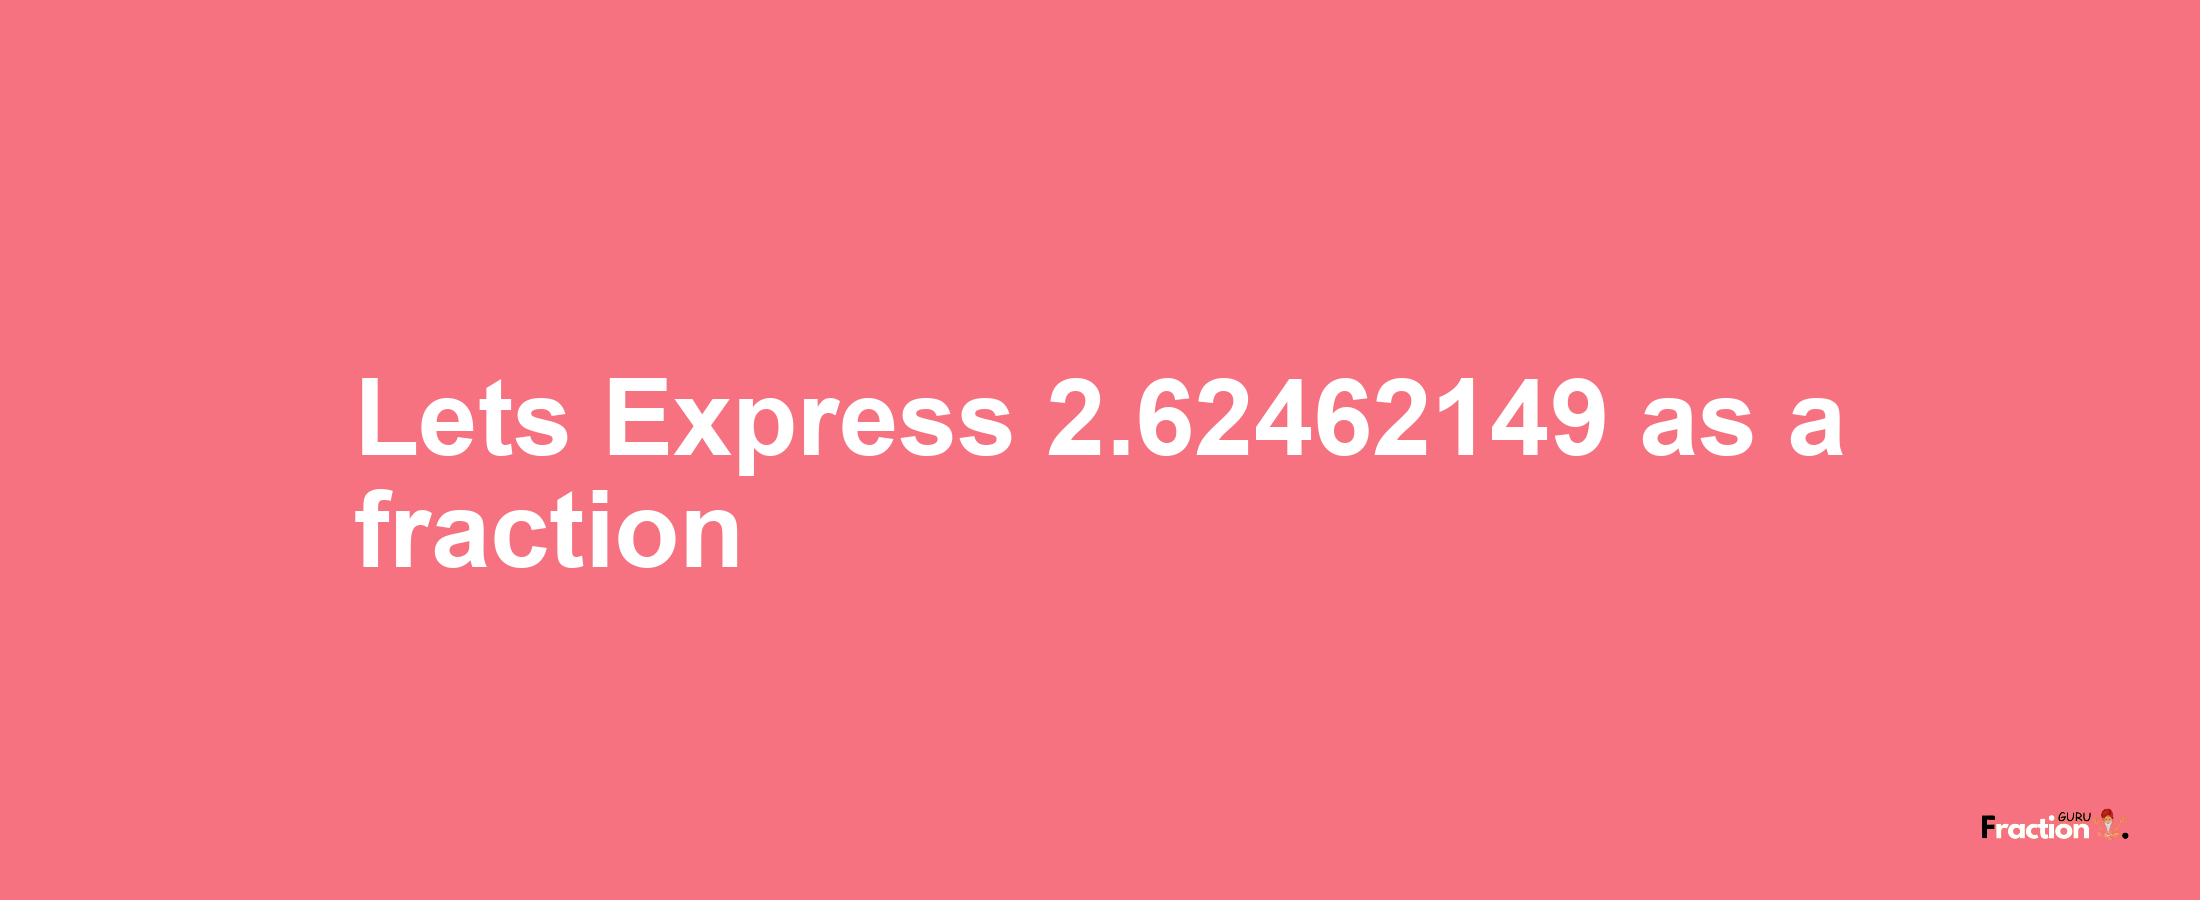 Lets Express 2.62462149 as afraction